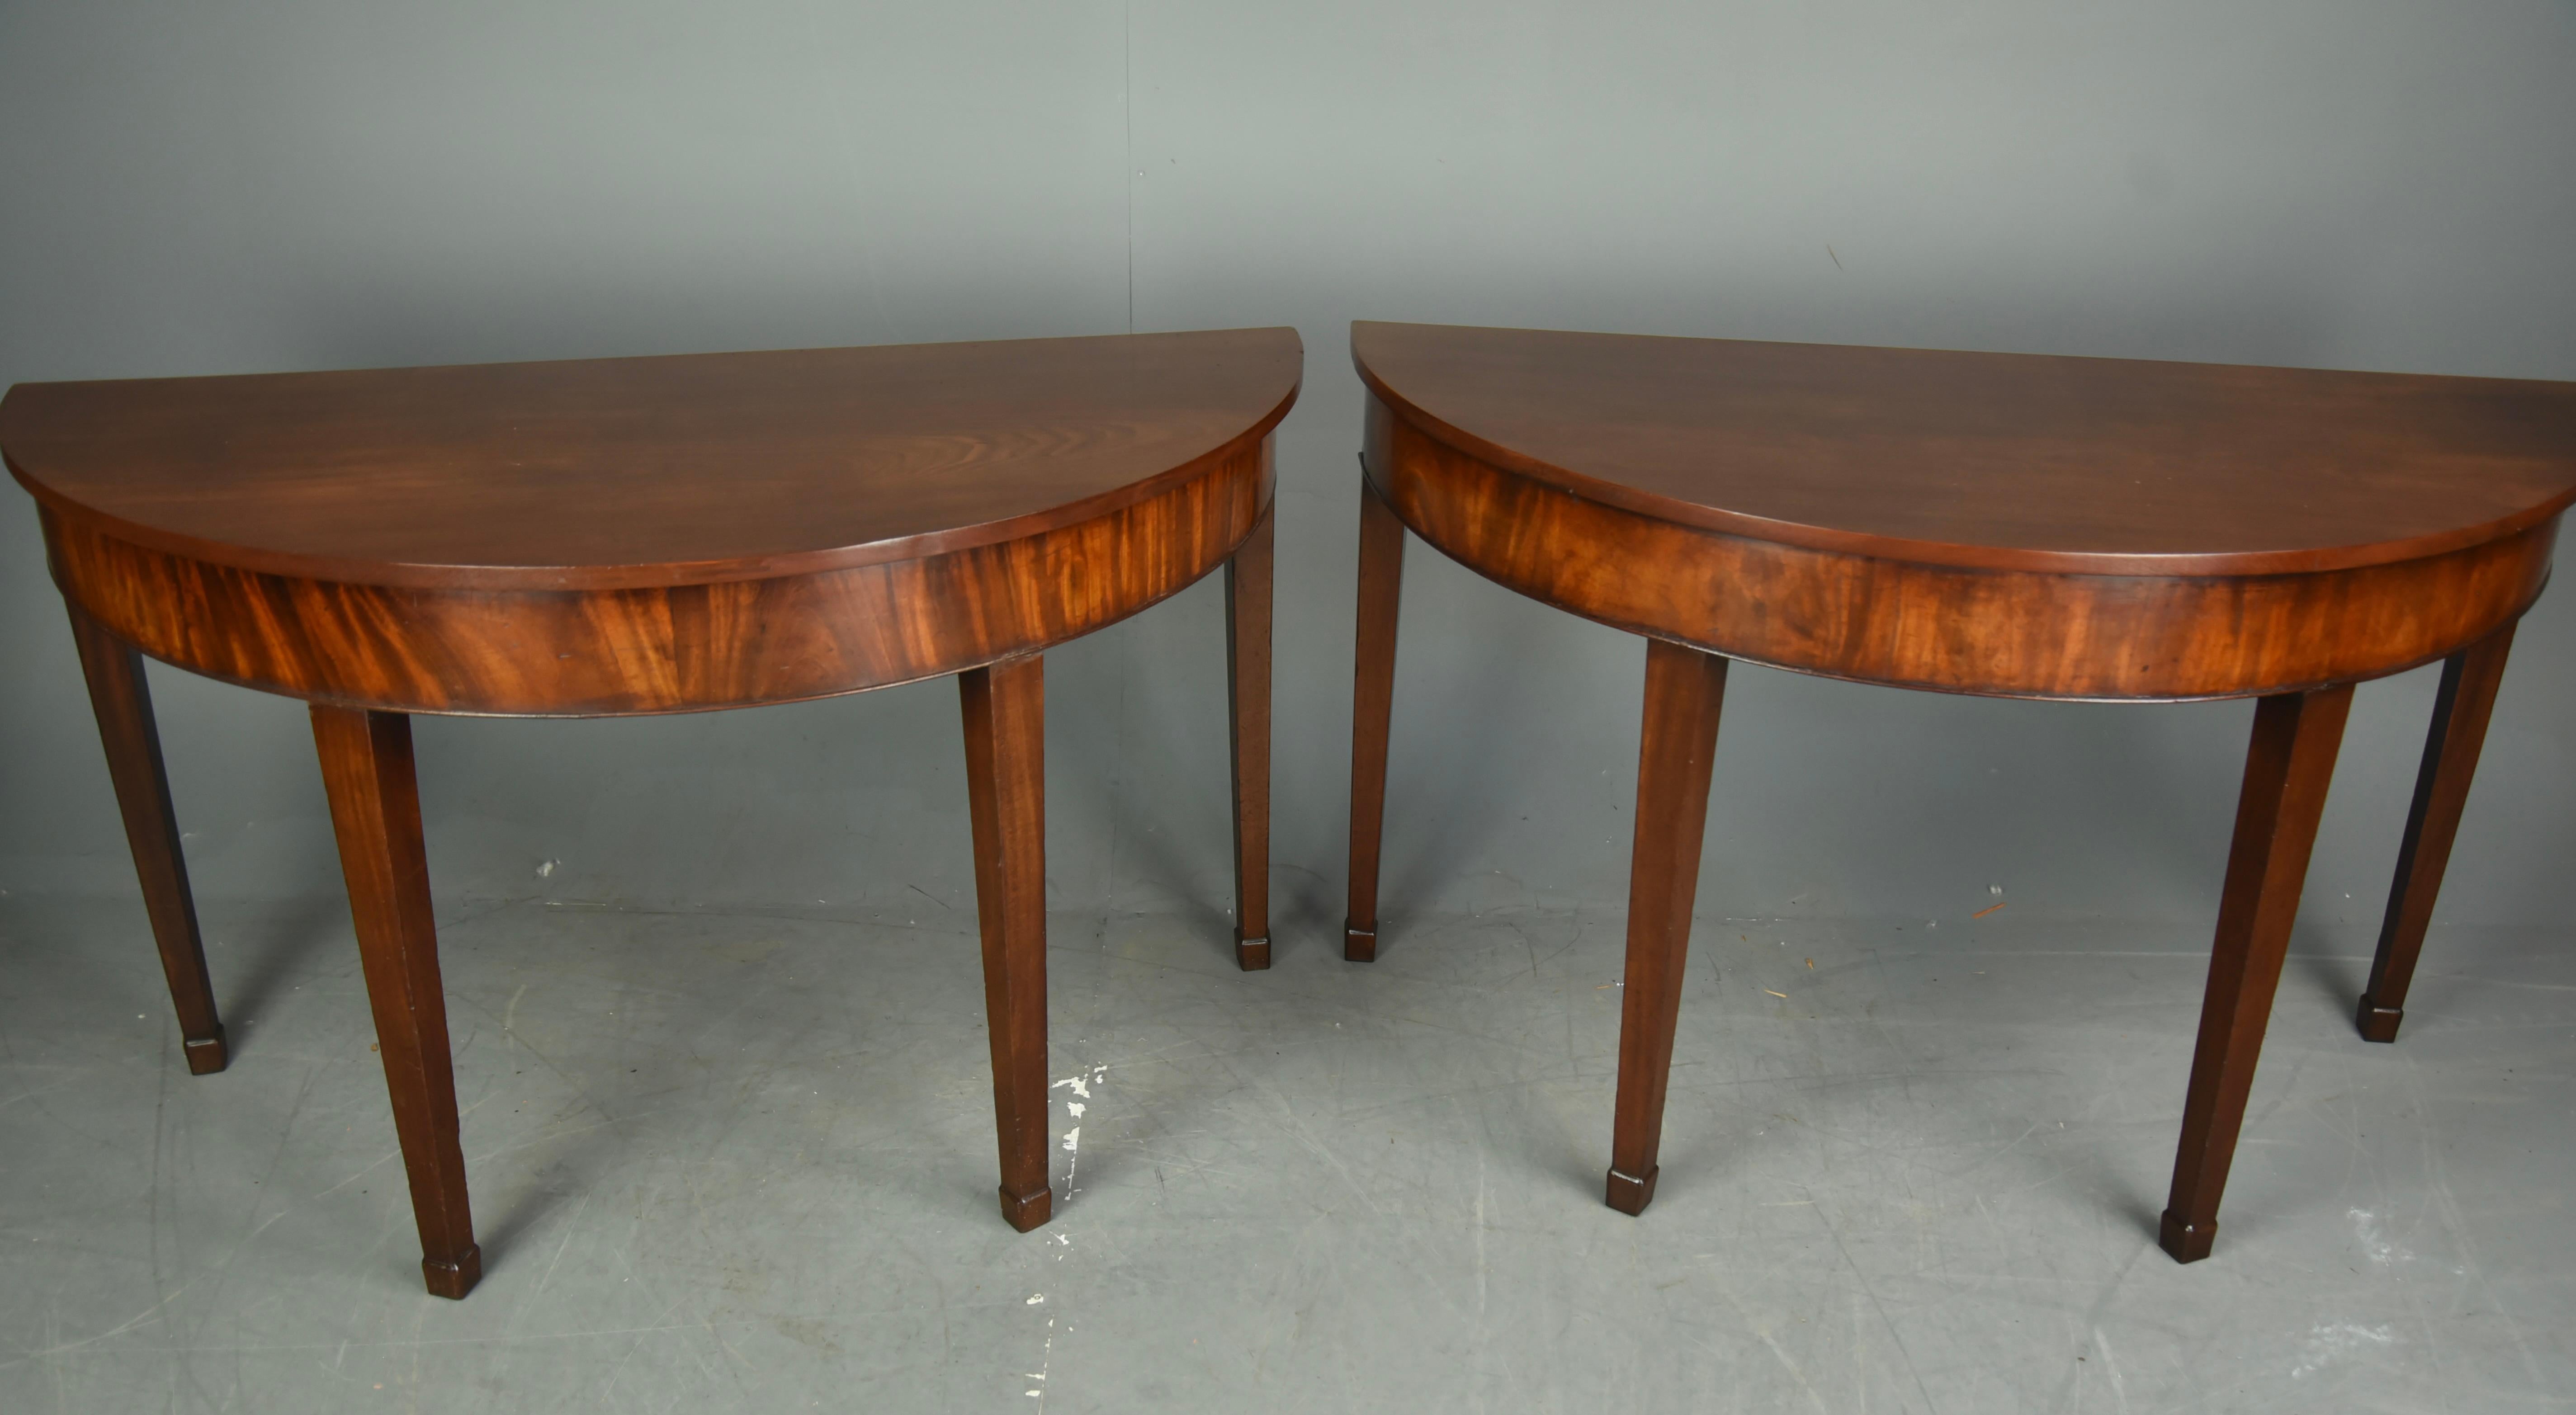 fine pair of early Georgian mahogany demilune console tables, circa 1720.
The table have very fine quality solid mahogany tops that have a great rich colour and grain formed from a single plank.
They each stand on four solid mahogany tapered legs